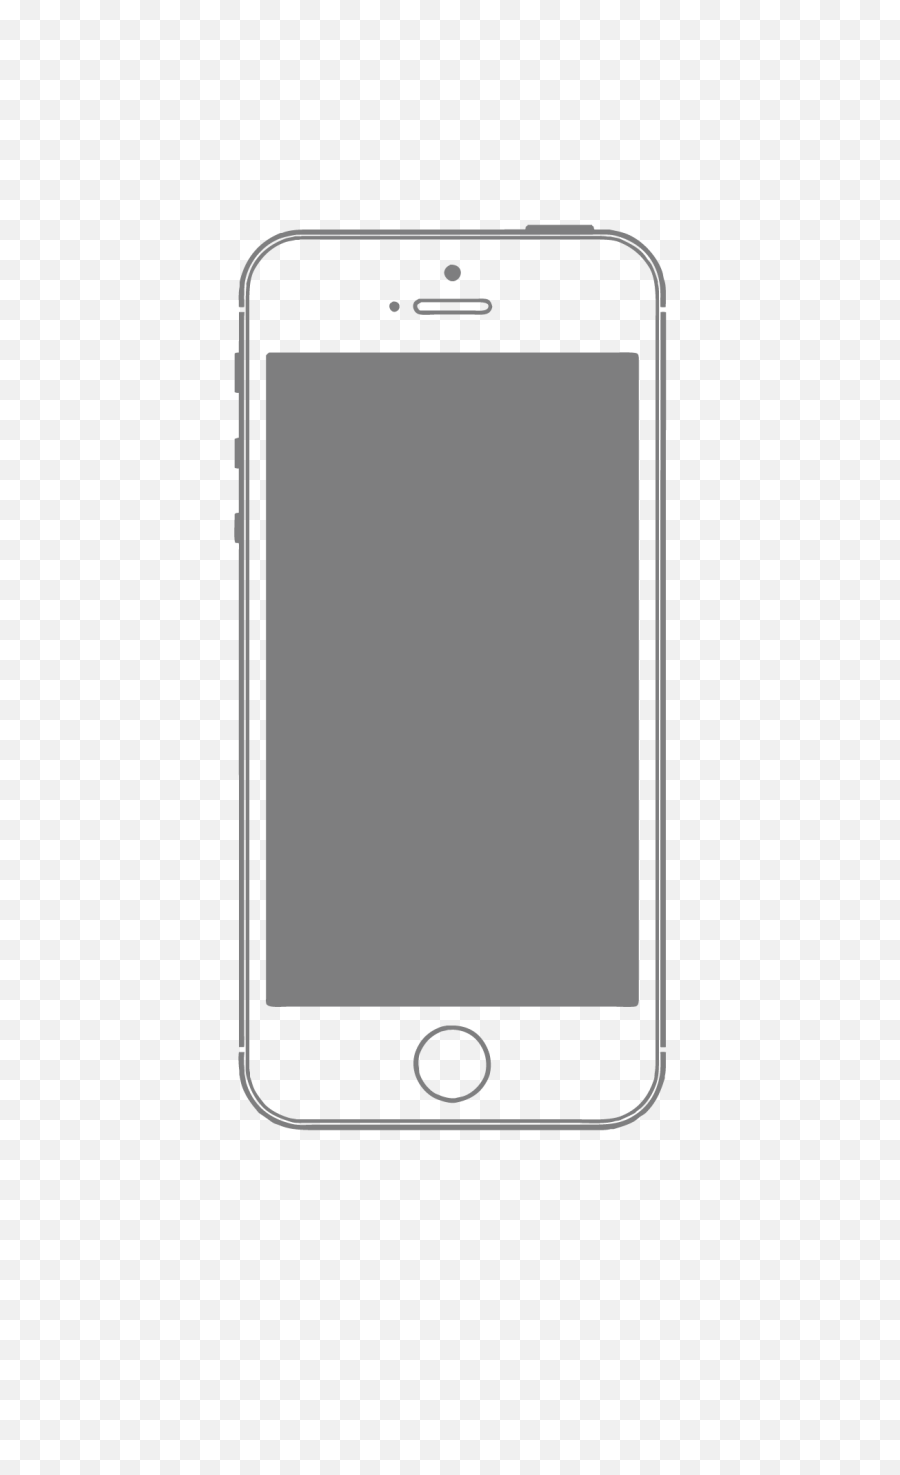 Iphone Images Hd Png - Iphone,Iphone Png